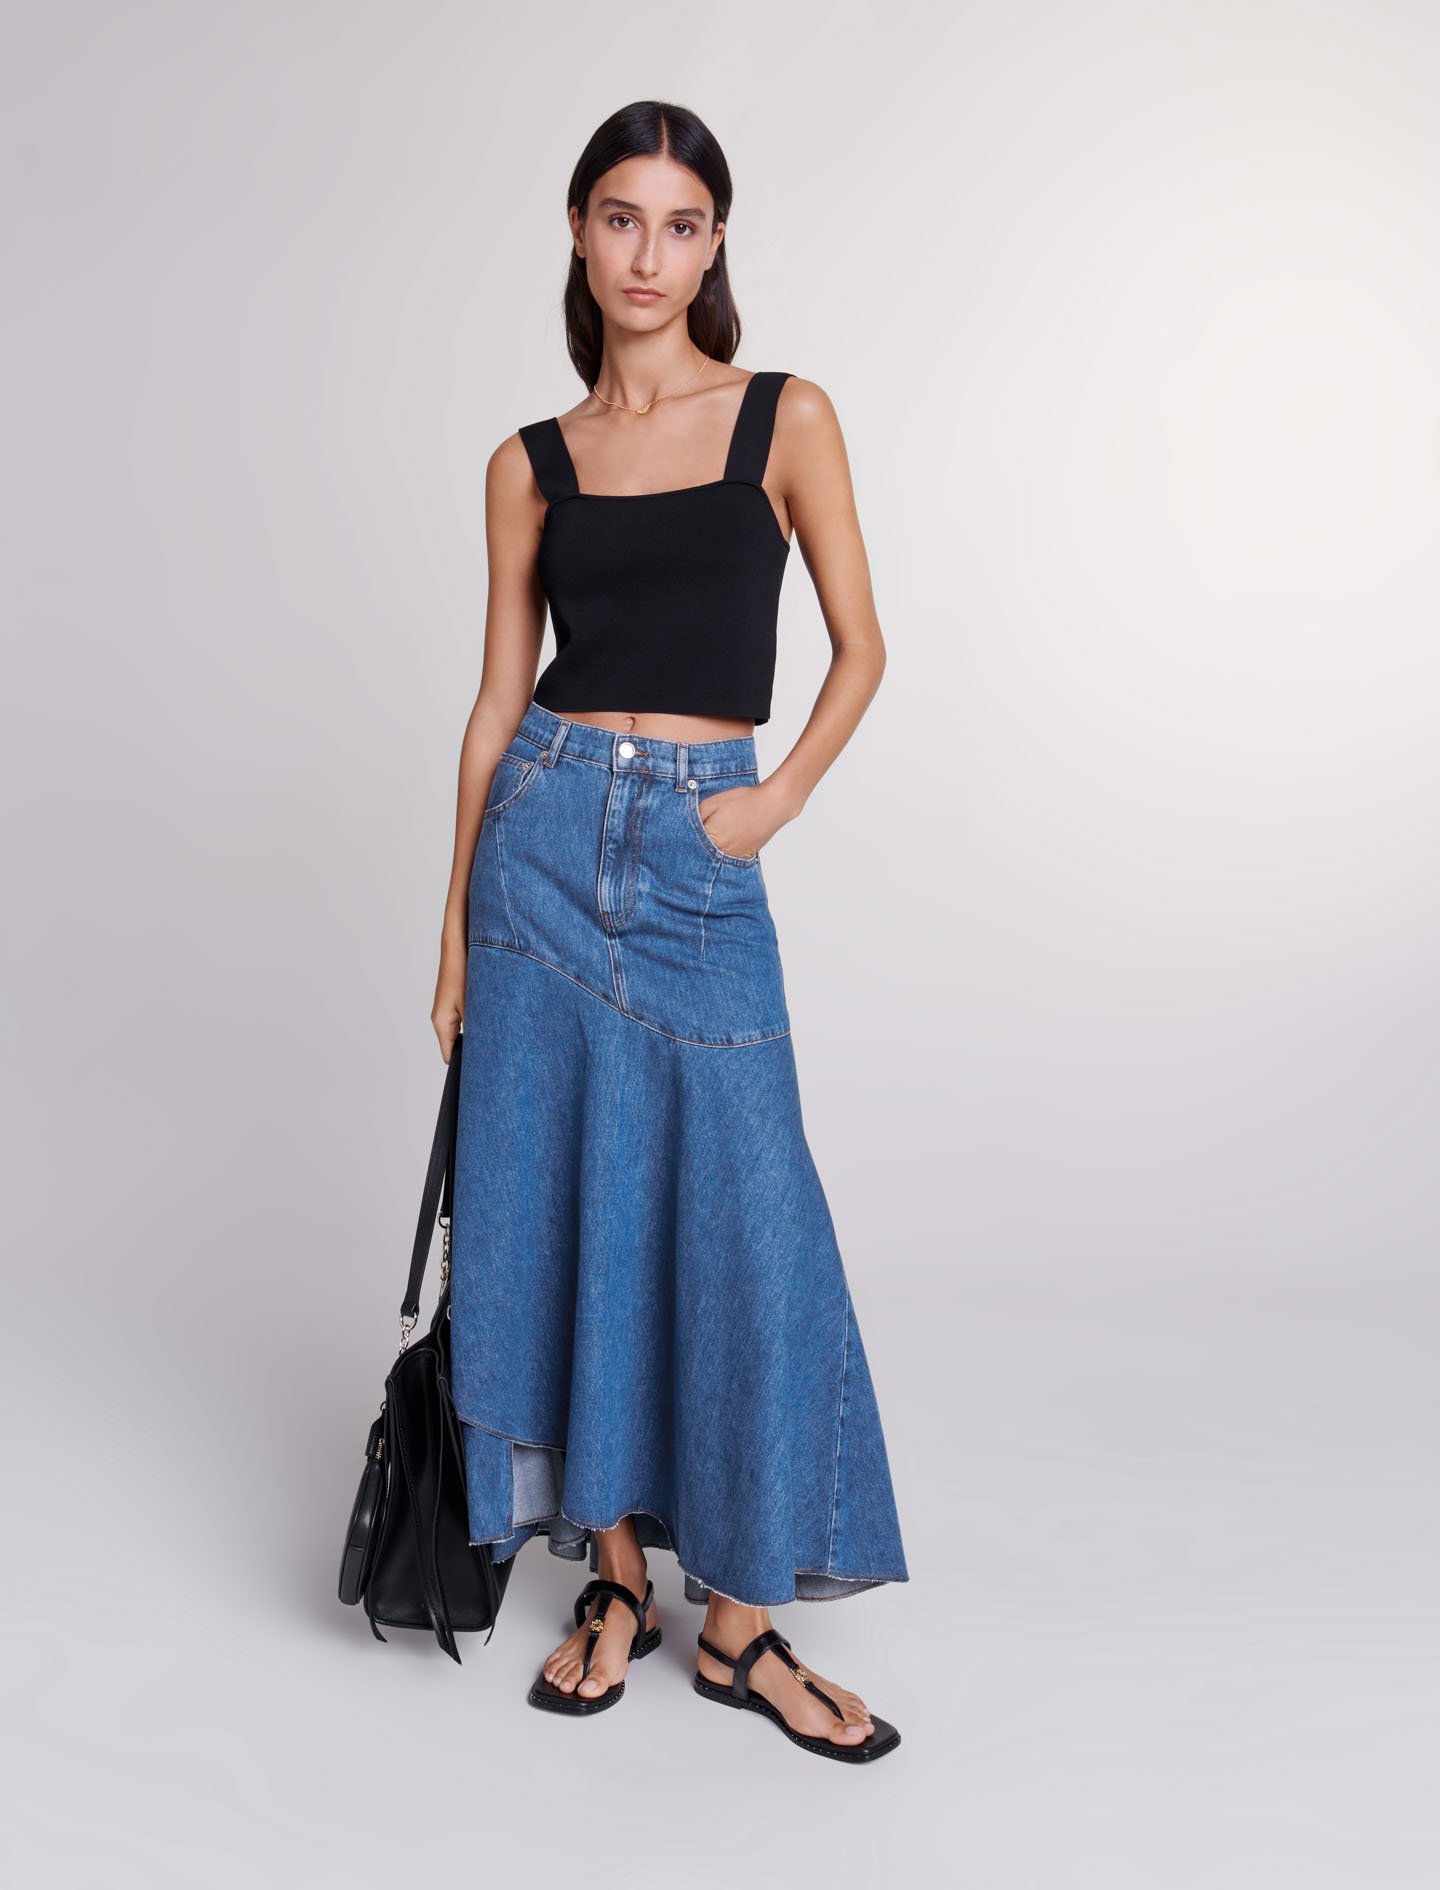 Mixte's cotton Pocket lining: Asymmetrical denim skirt for Spring/Summer, size Mixte-Skirts & Shorts-US XL / FR 41, in color Blue / Blue